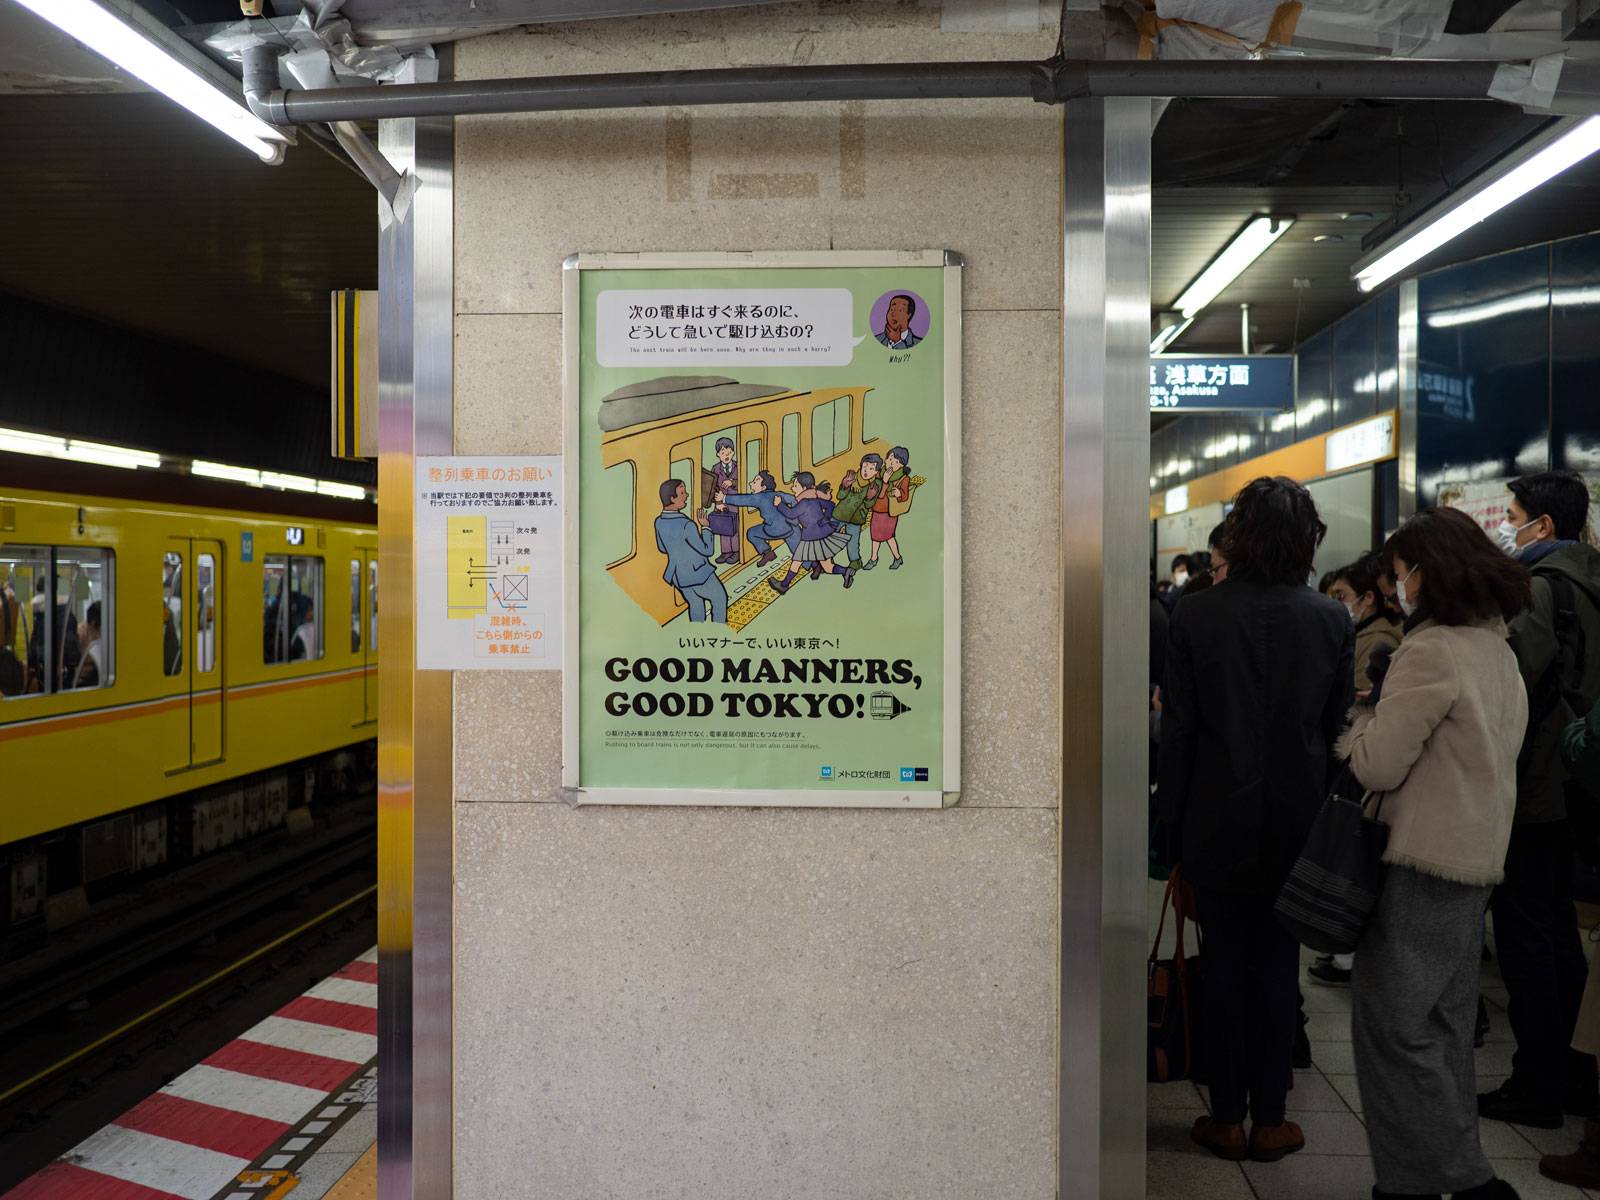 Sign in the crowded station “Good Manners, Good Tokyo!”